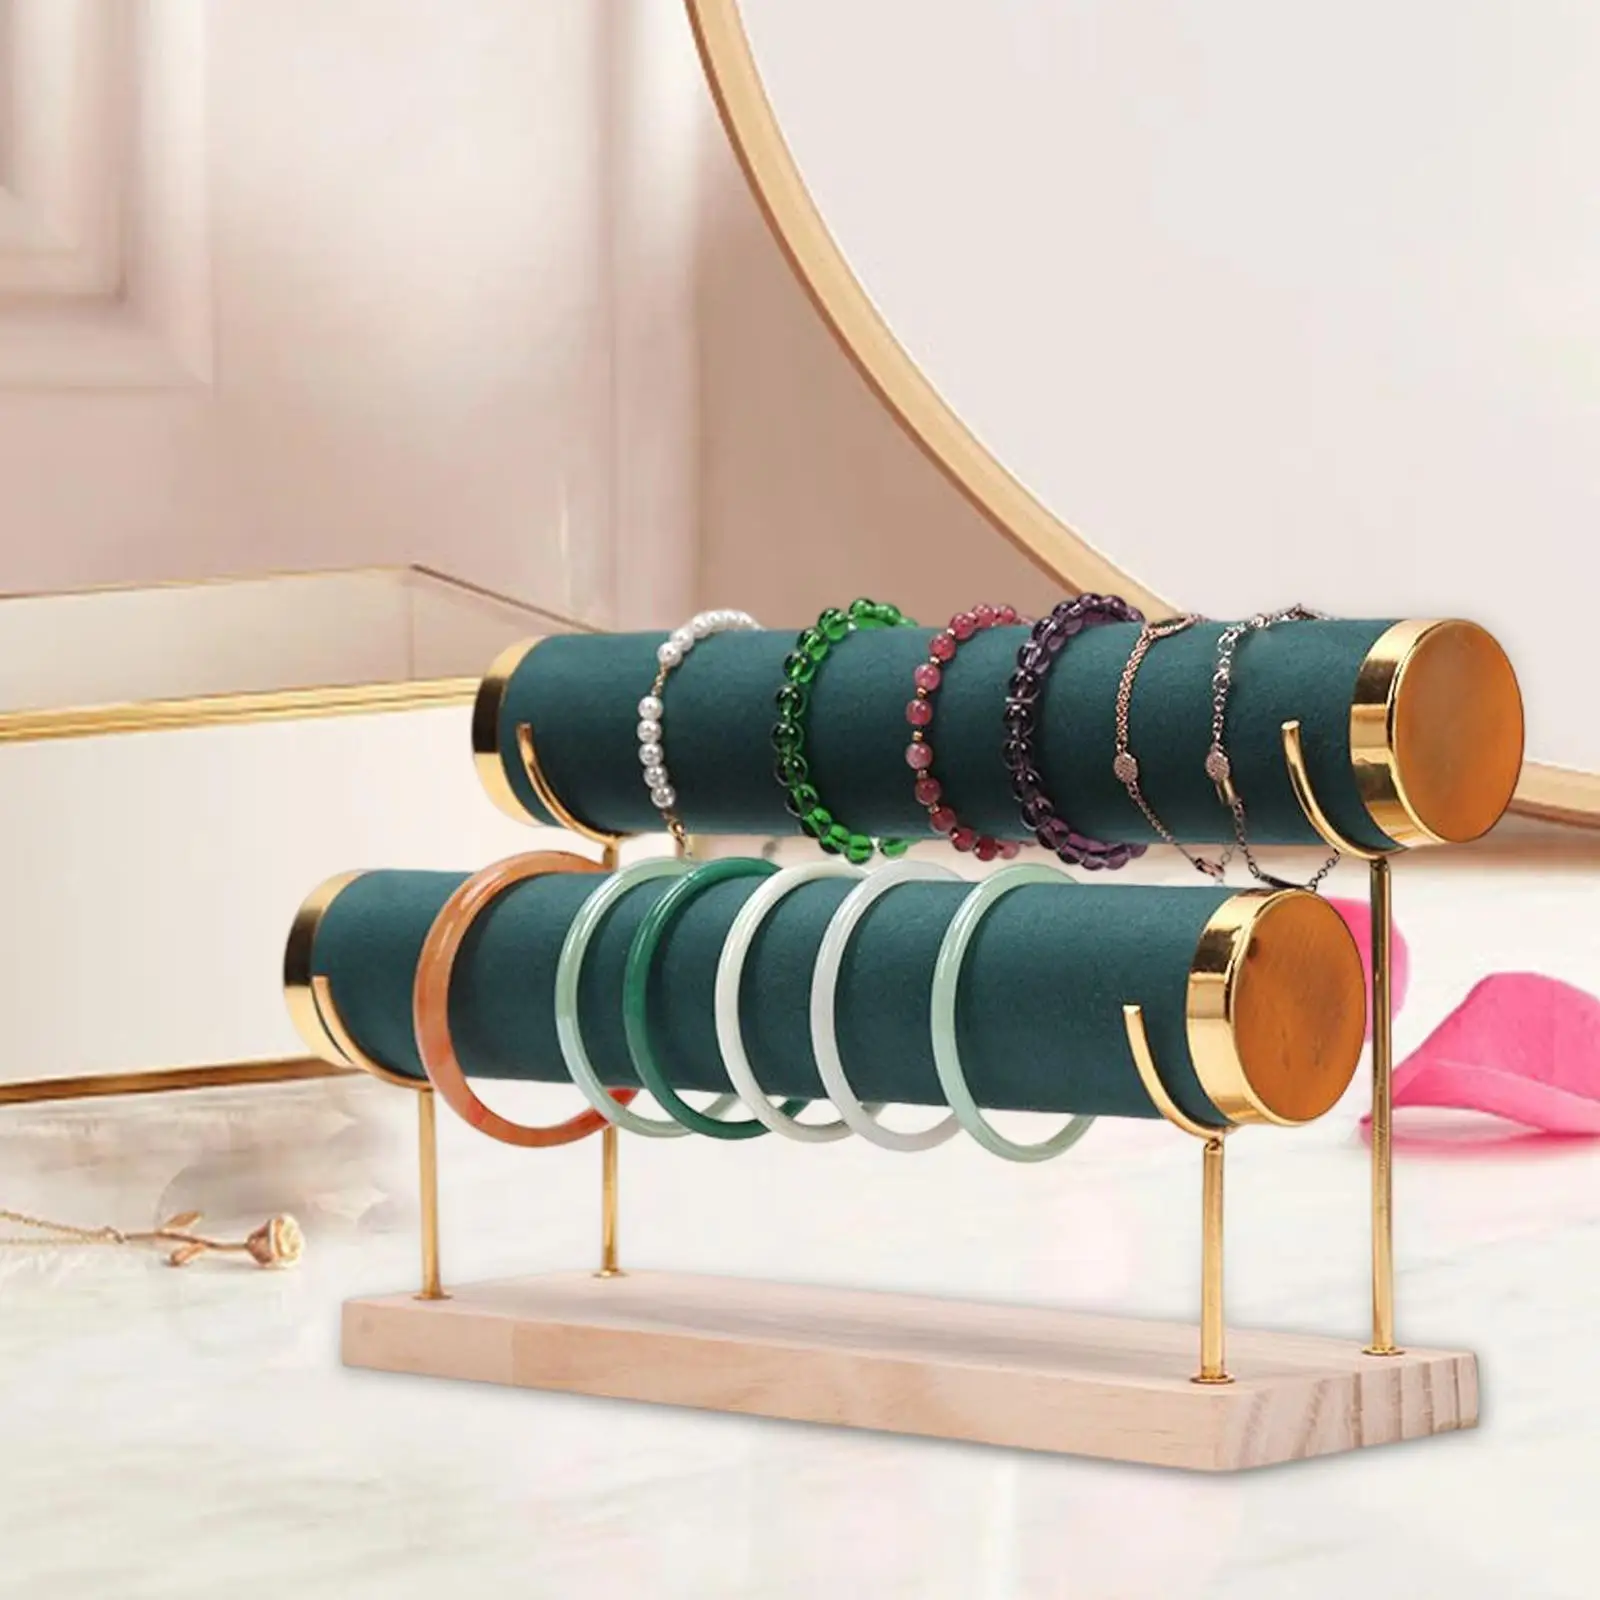 2 Layers Bracelet Display Stand Wood Base Fashion Jewelry Display Rack for Bangle Watch Jewelry Shop Countertop Home Office